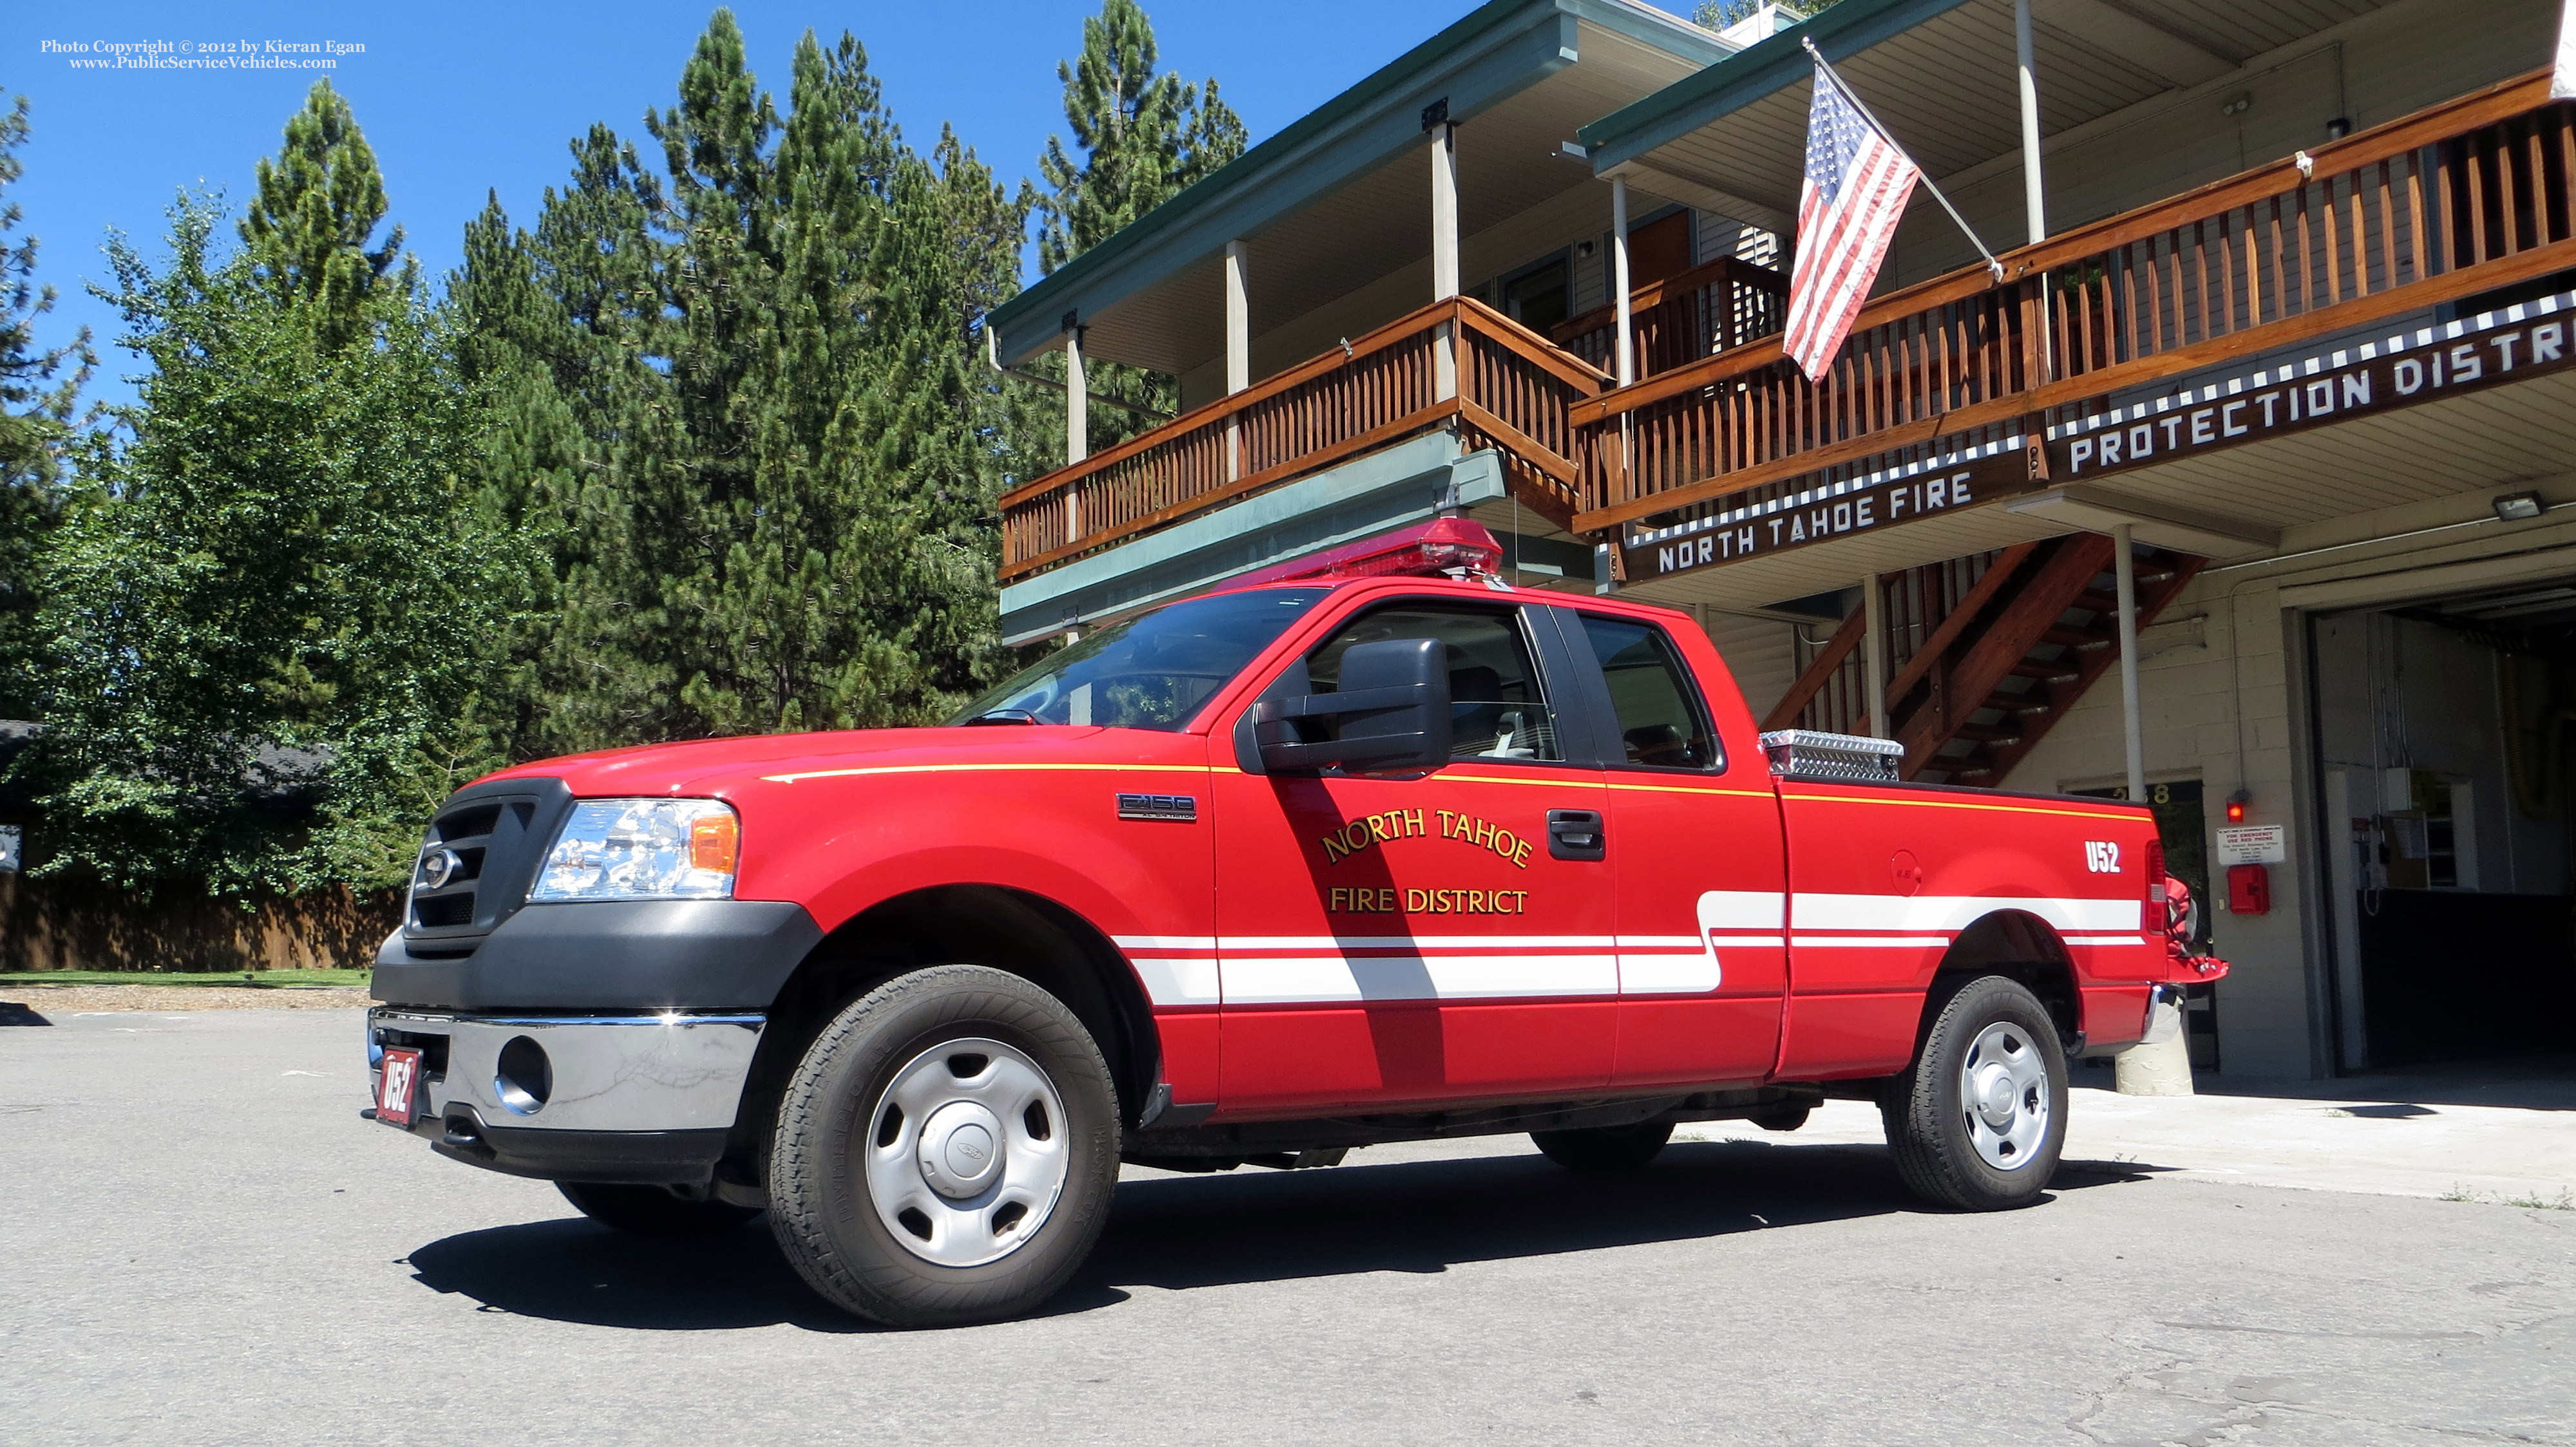 A photo  of North Tahoe Fire District
            Utility 52, a 2004-2008 Ford F-150 Super Cab             taken by Kieran Egan